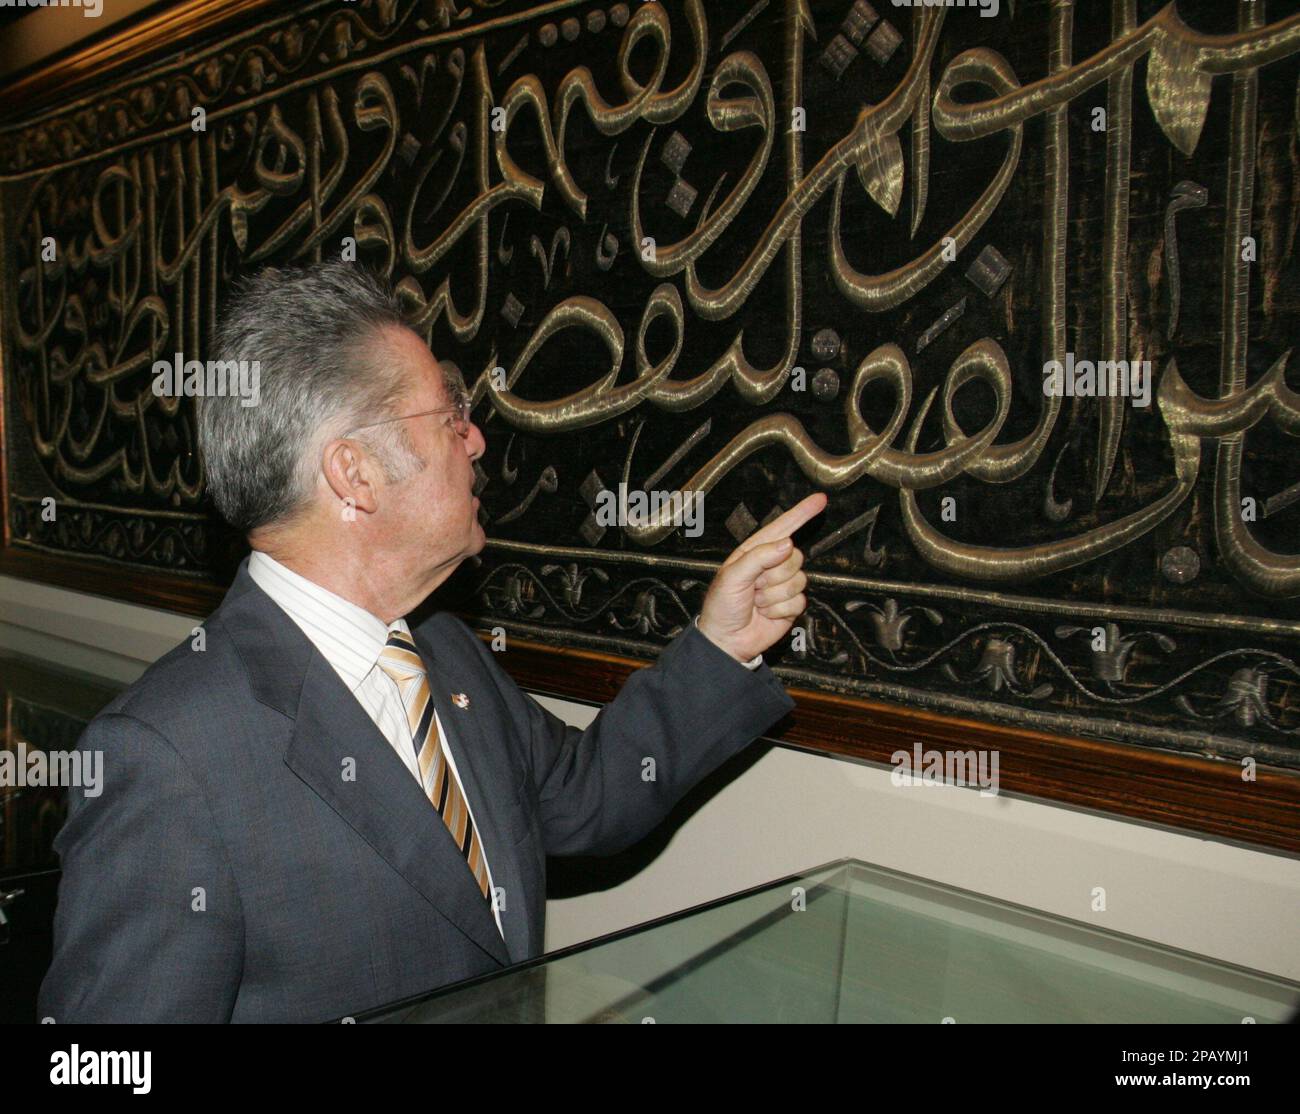 Austrian President Heinz Fischer examines an exhibit during his visit at  the Bibliotheca Alexandria, on Sunday, Oct. 21, 2007. Fischer arrived in  Egypt for an offical three-day working visit and is scheduled